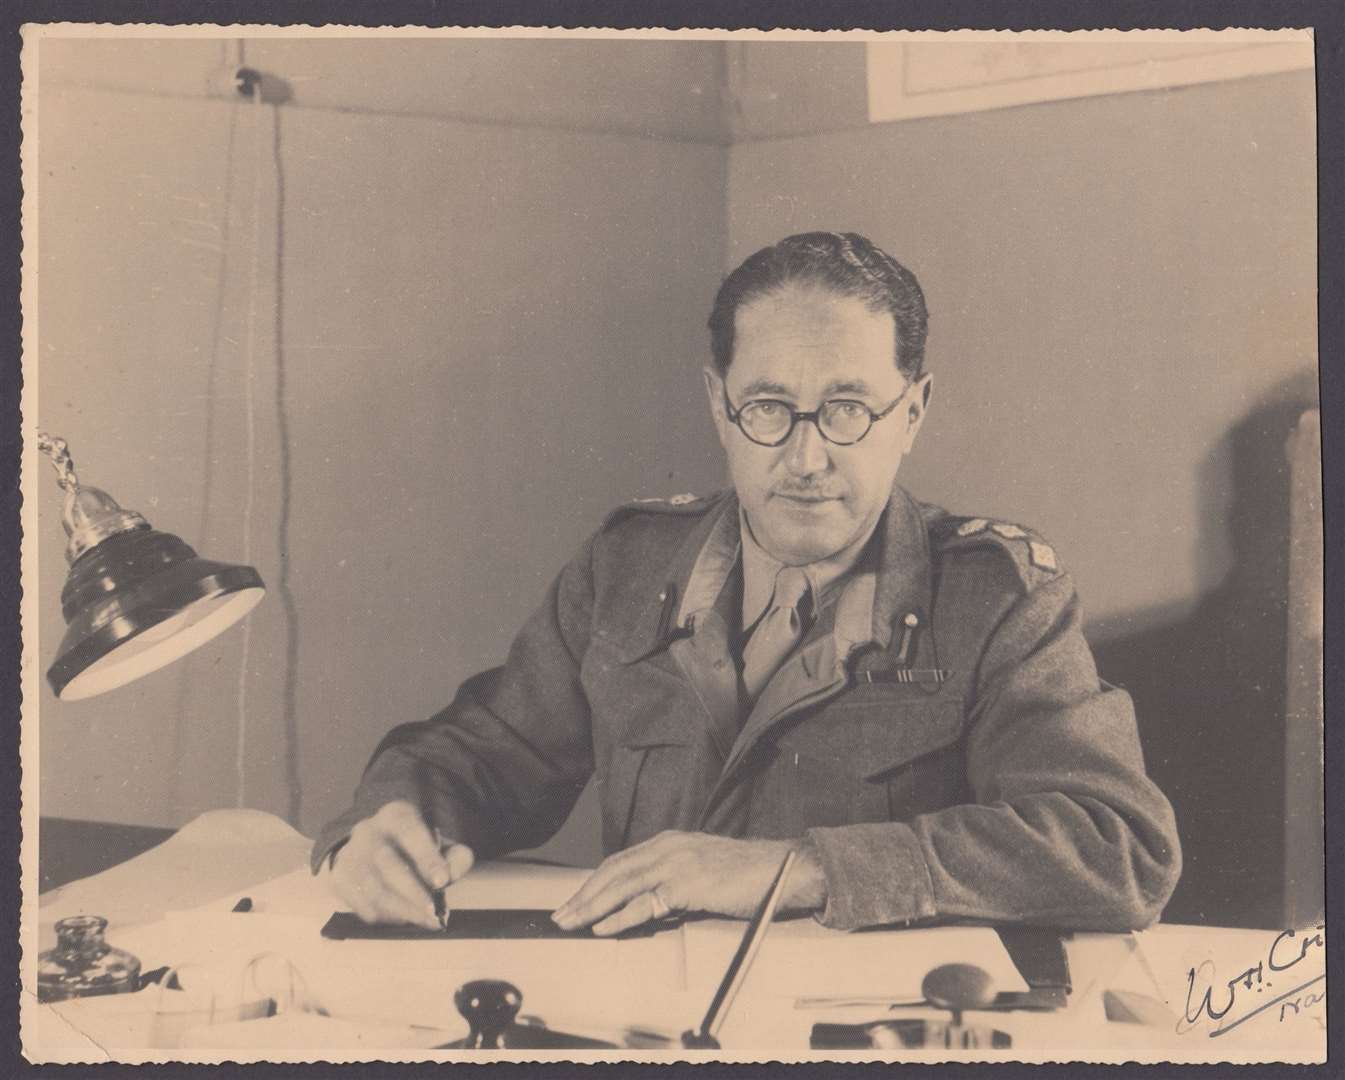 Col Walter Hugh Crichton was appointed chief medical officer of Sittingbourne when the NHS began in 1948